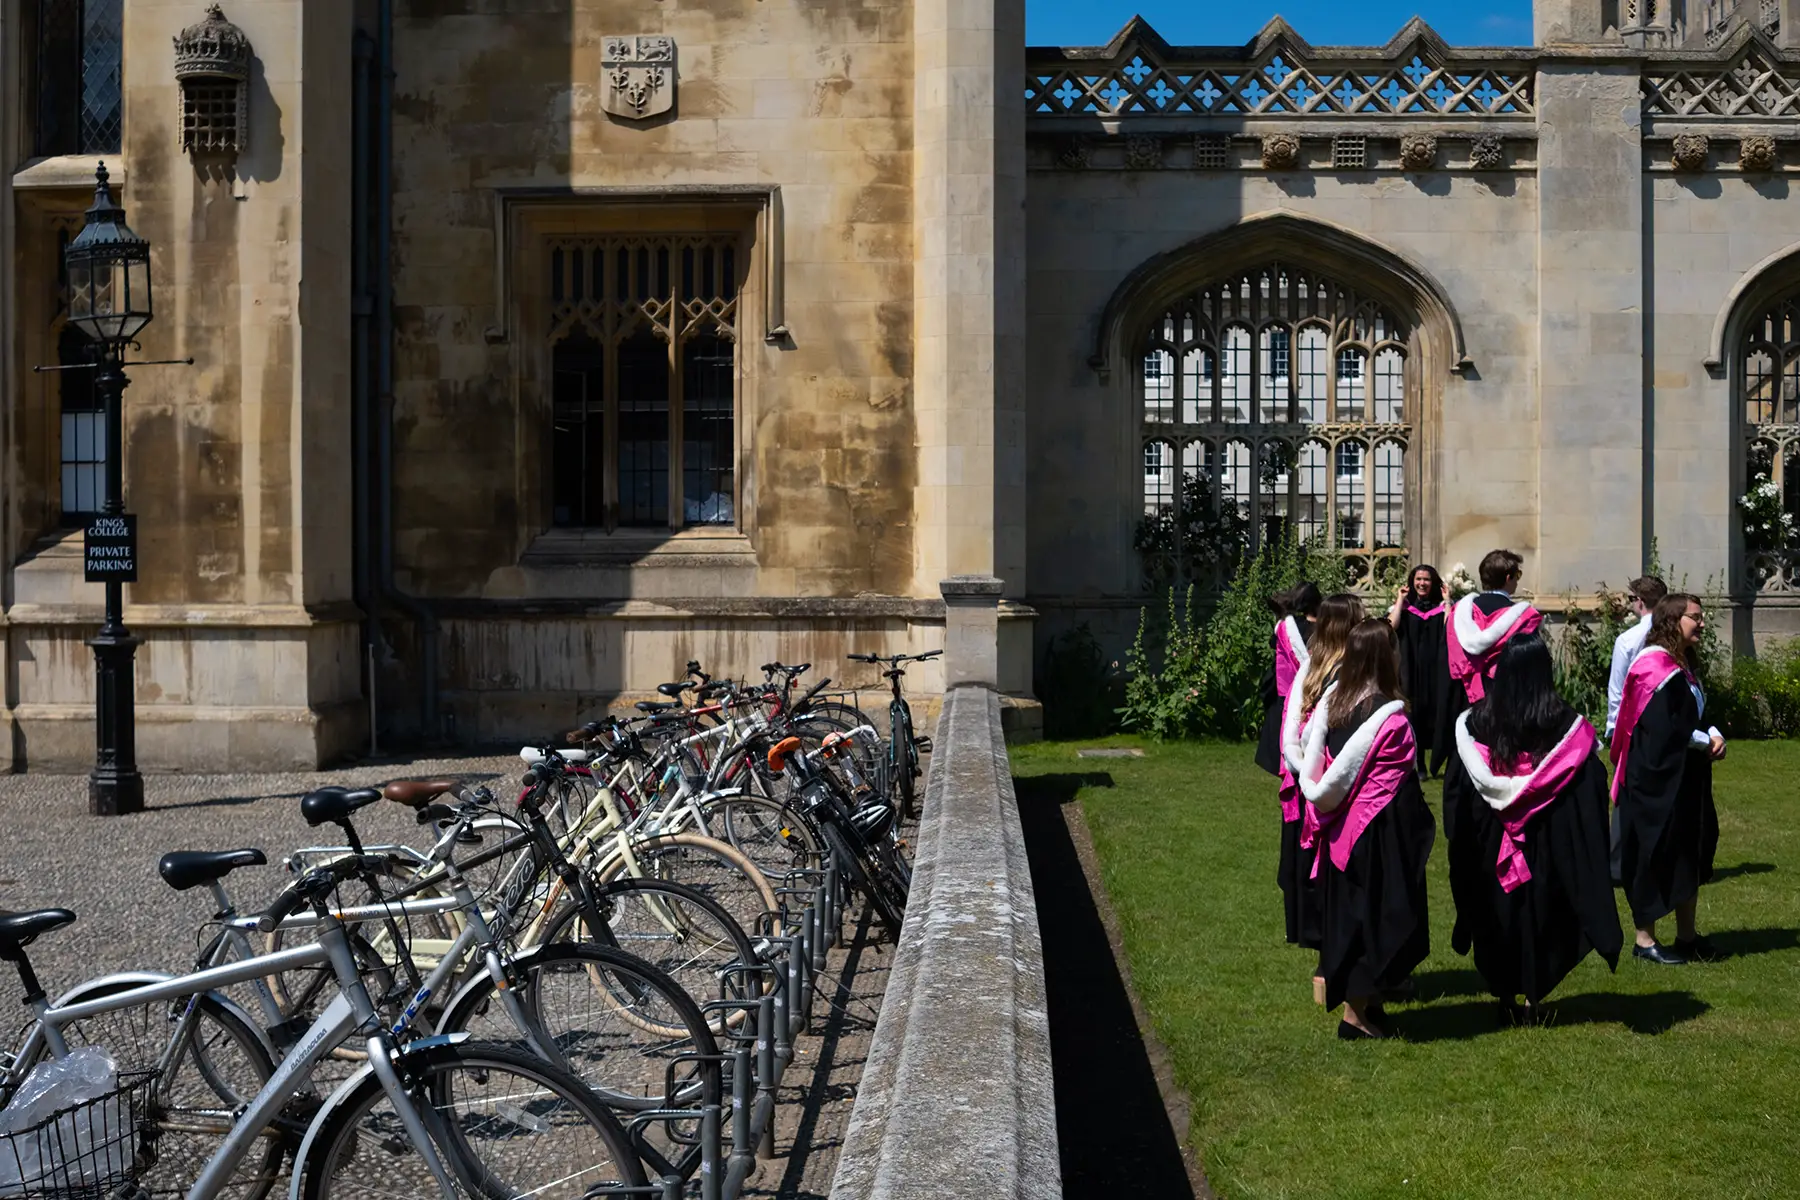 University of Cambridge students in graduation robes standing on grass outside a university building next to a row of parked bicycles.